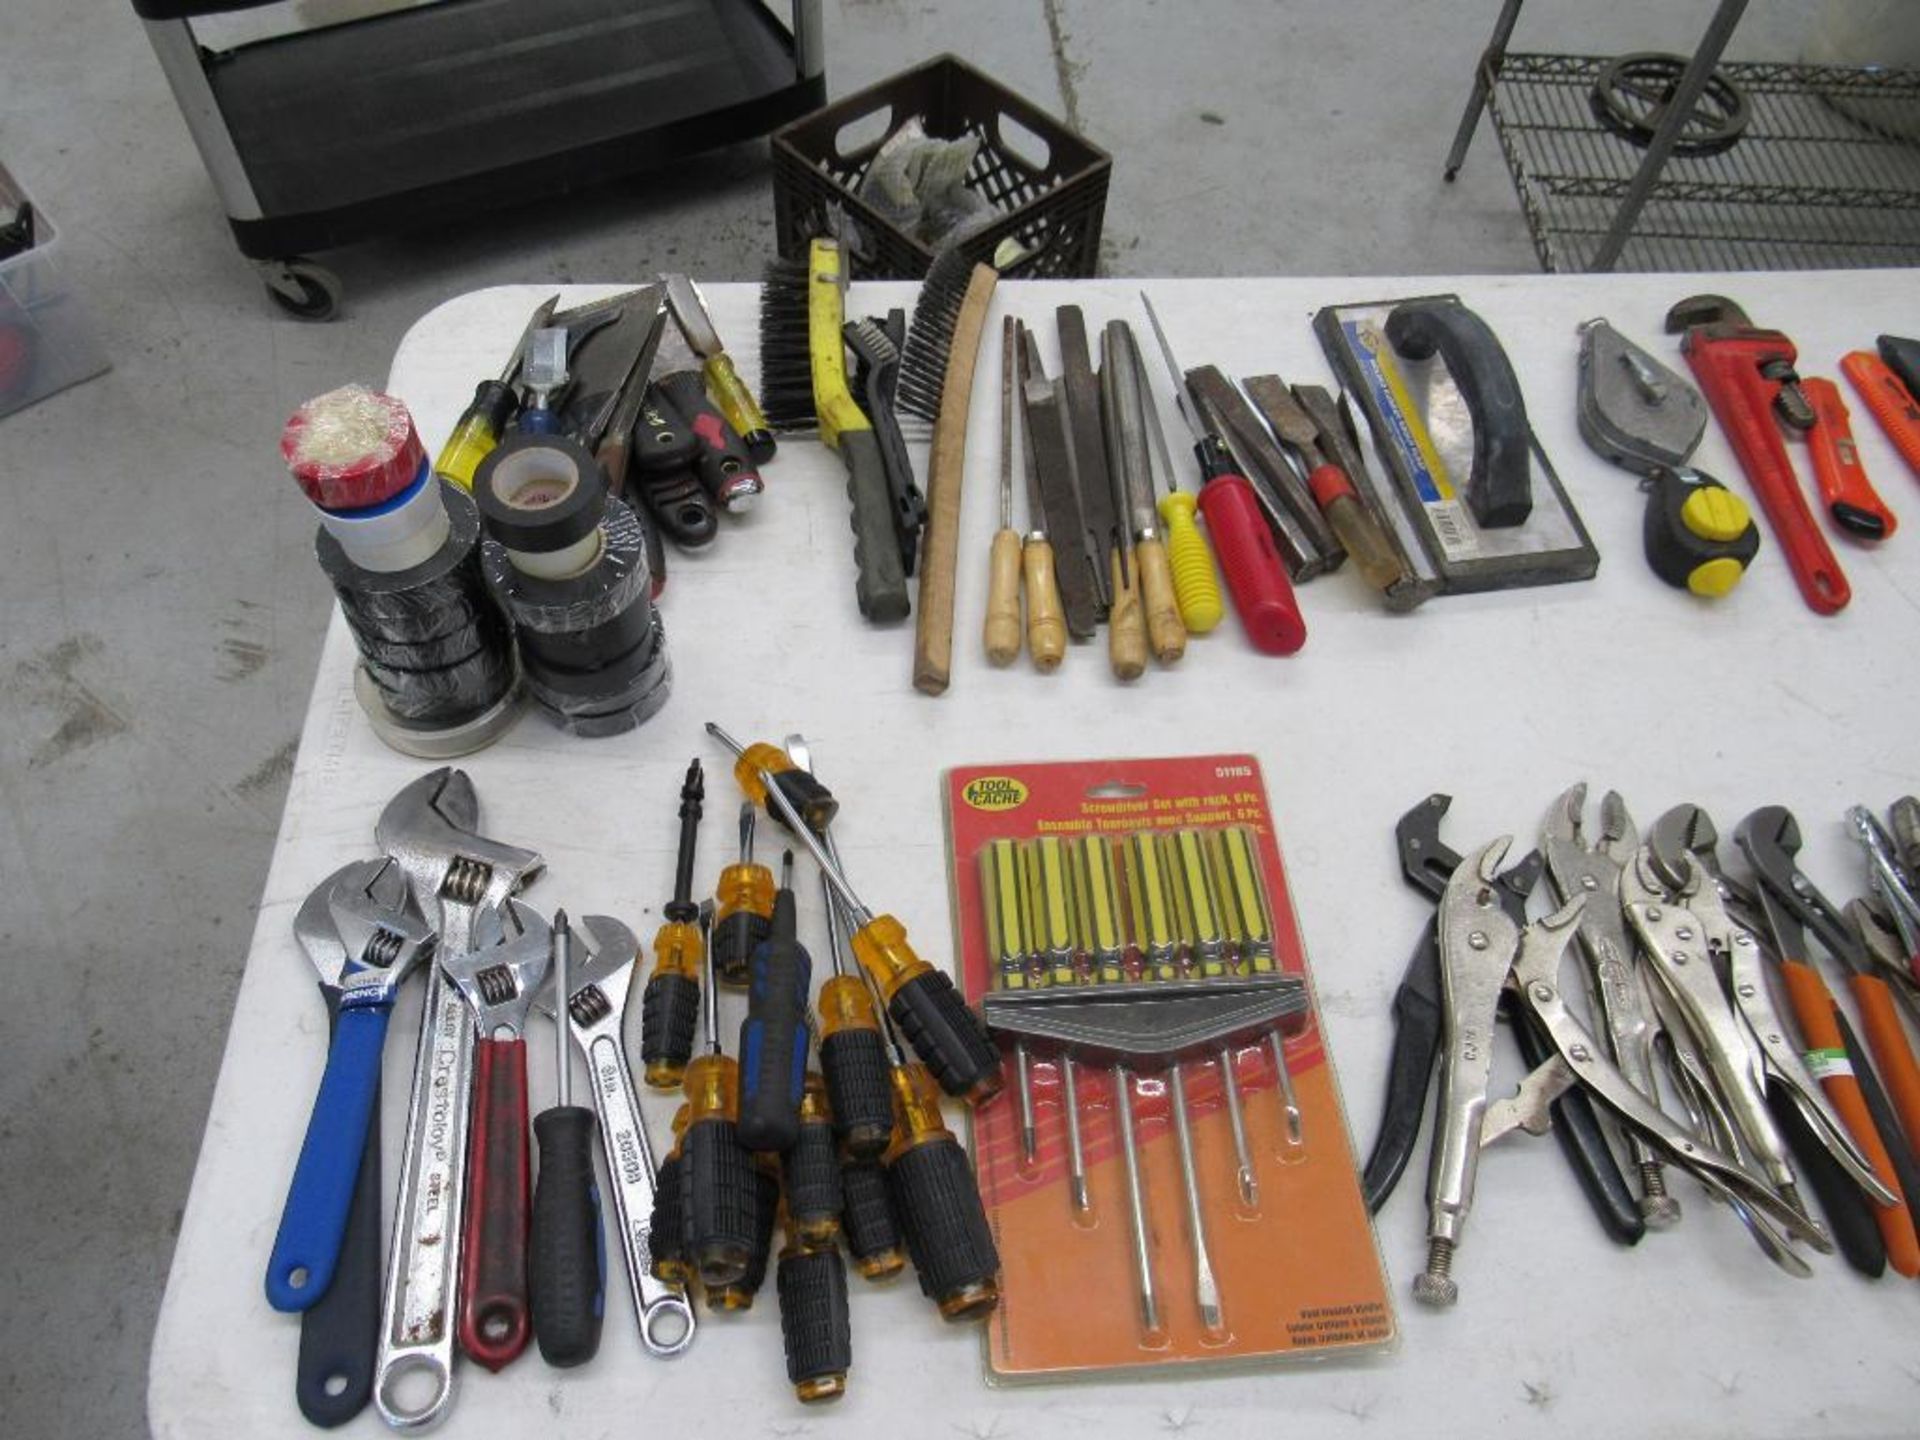 LOT: Assortment of Wrenches, Screw Drivers, Chanel Locks, Scrapers, Files, Brushes, Box Cutters - Image 3 of 7